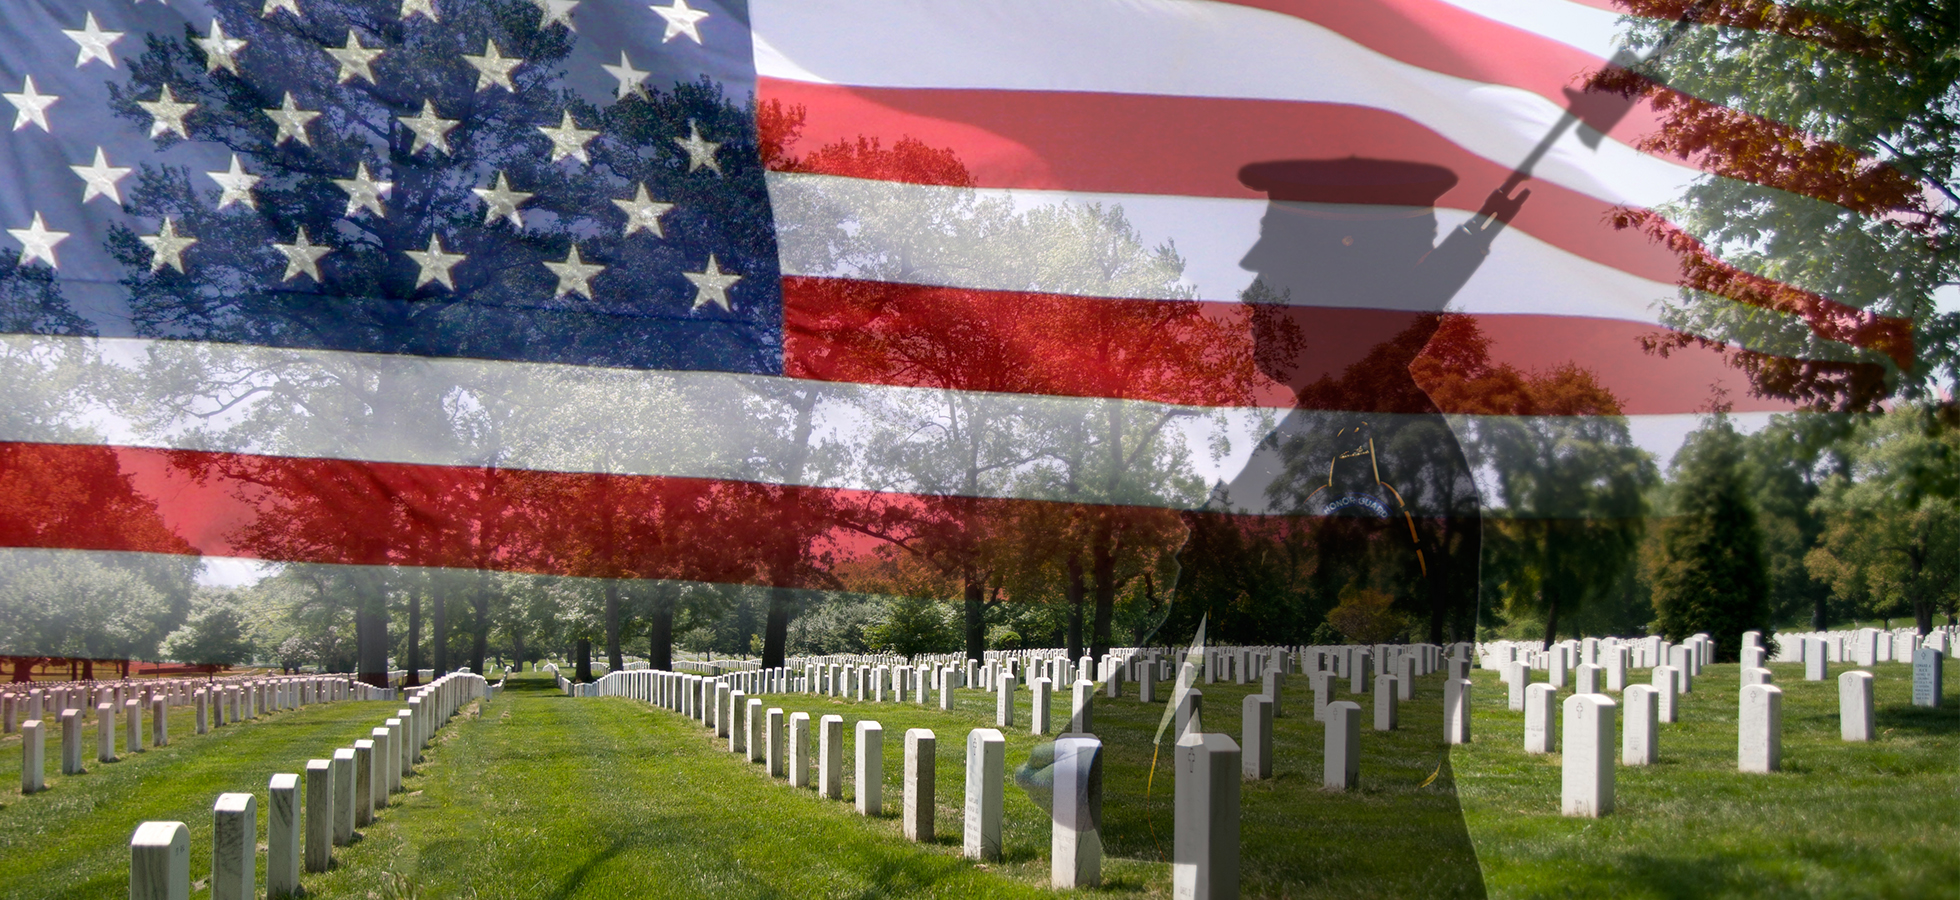 Image of an American flag over Arlington National Cemetery.